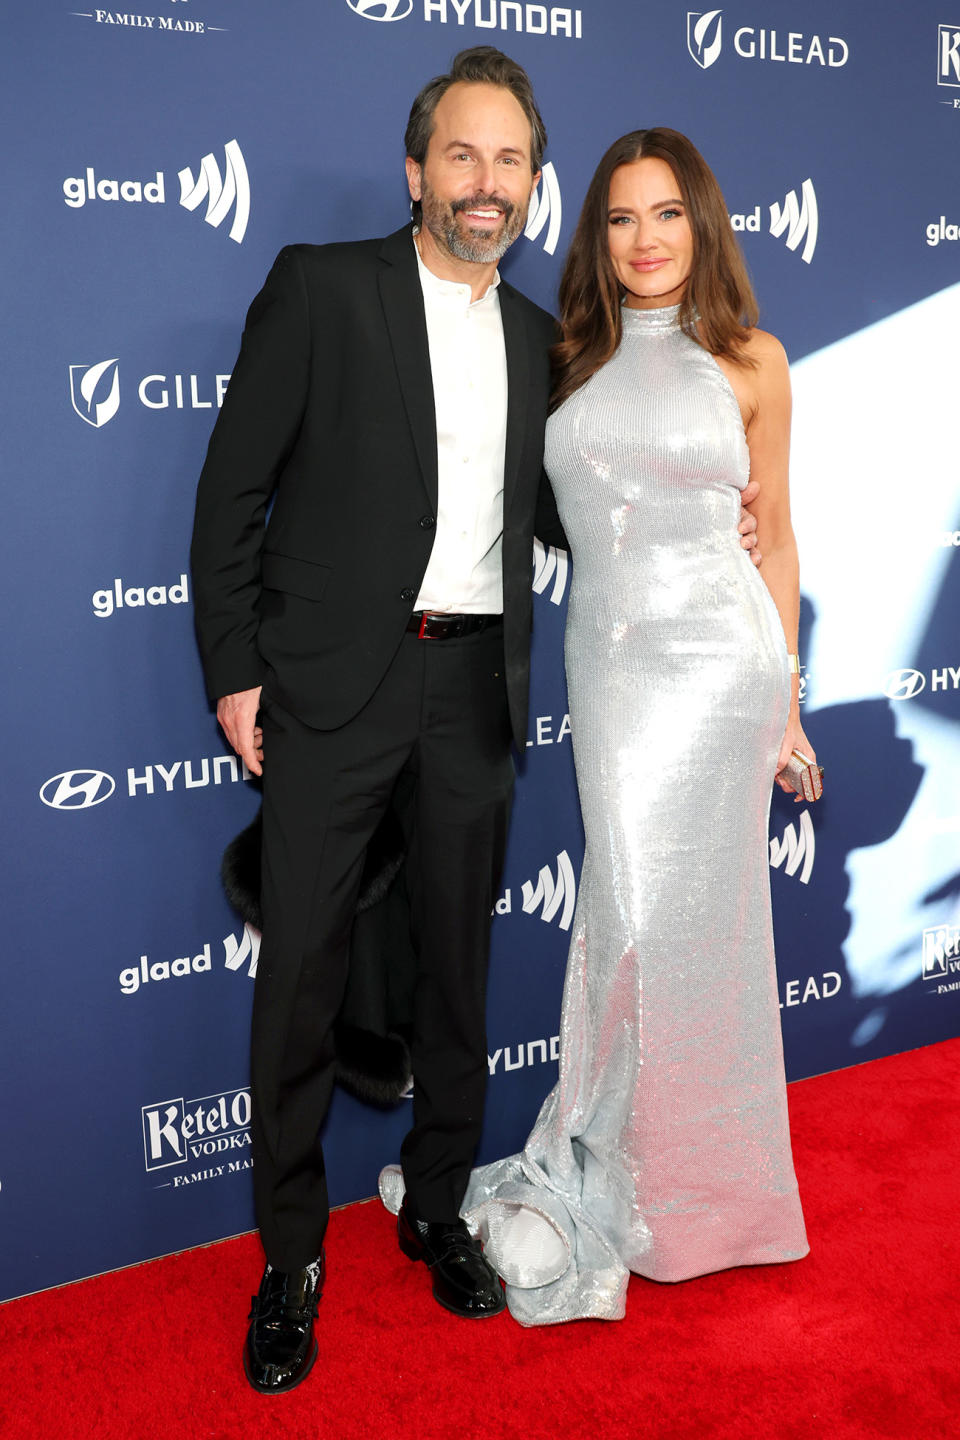 <p>BEVERLY HILLS, CALIFORNIA – MARCH 30: (L-R) Seth Marks and Meredith Marks attend the 34th Annual GLAAD Media Awards at The Beverly Hilton on March 30, 2023 in Beverly Hills, California. (Photo by Monica Schipper/Getty Images)</p>